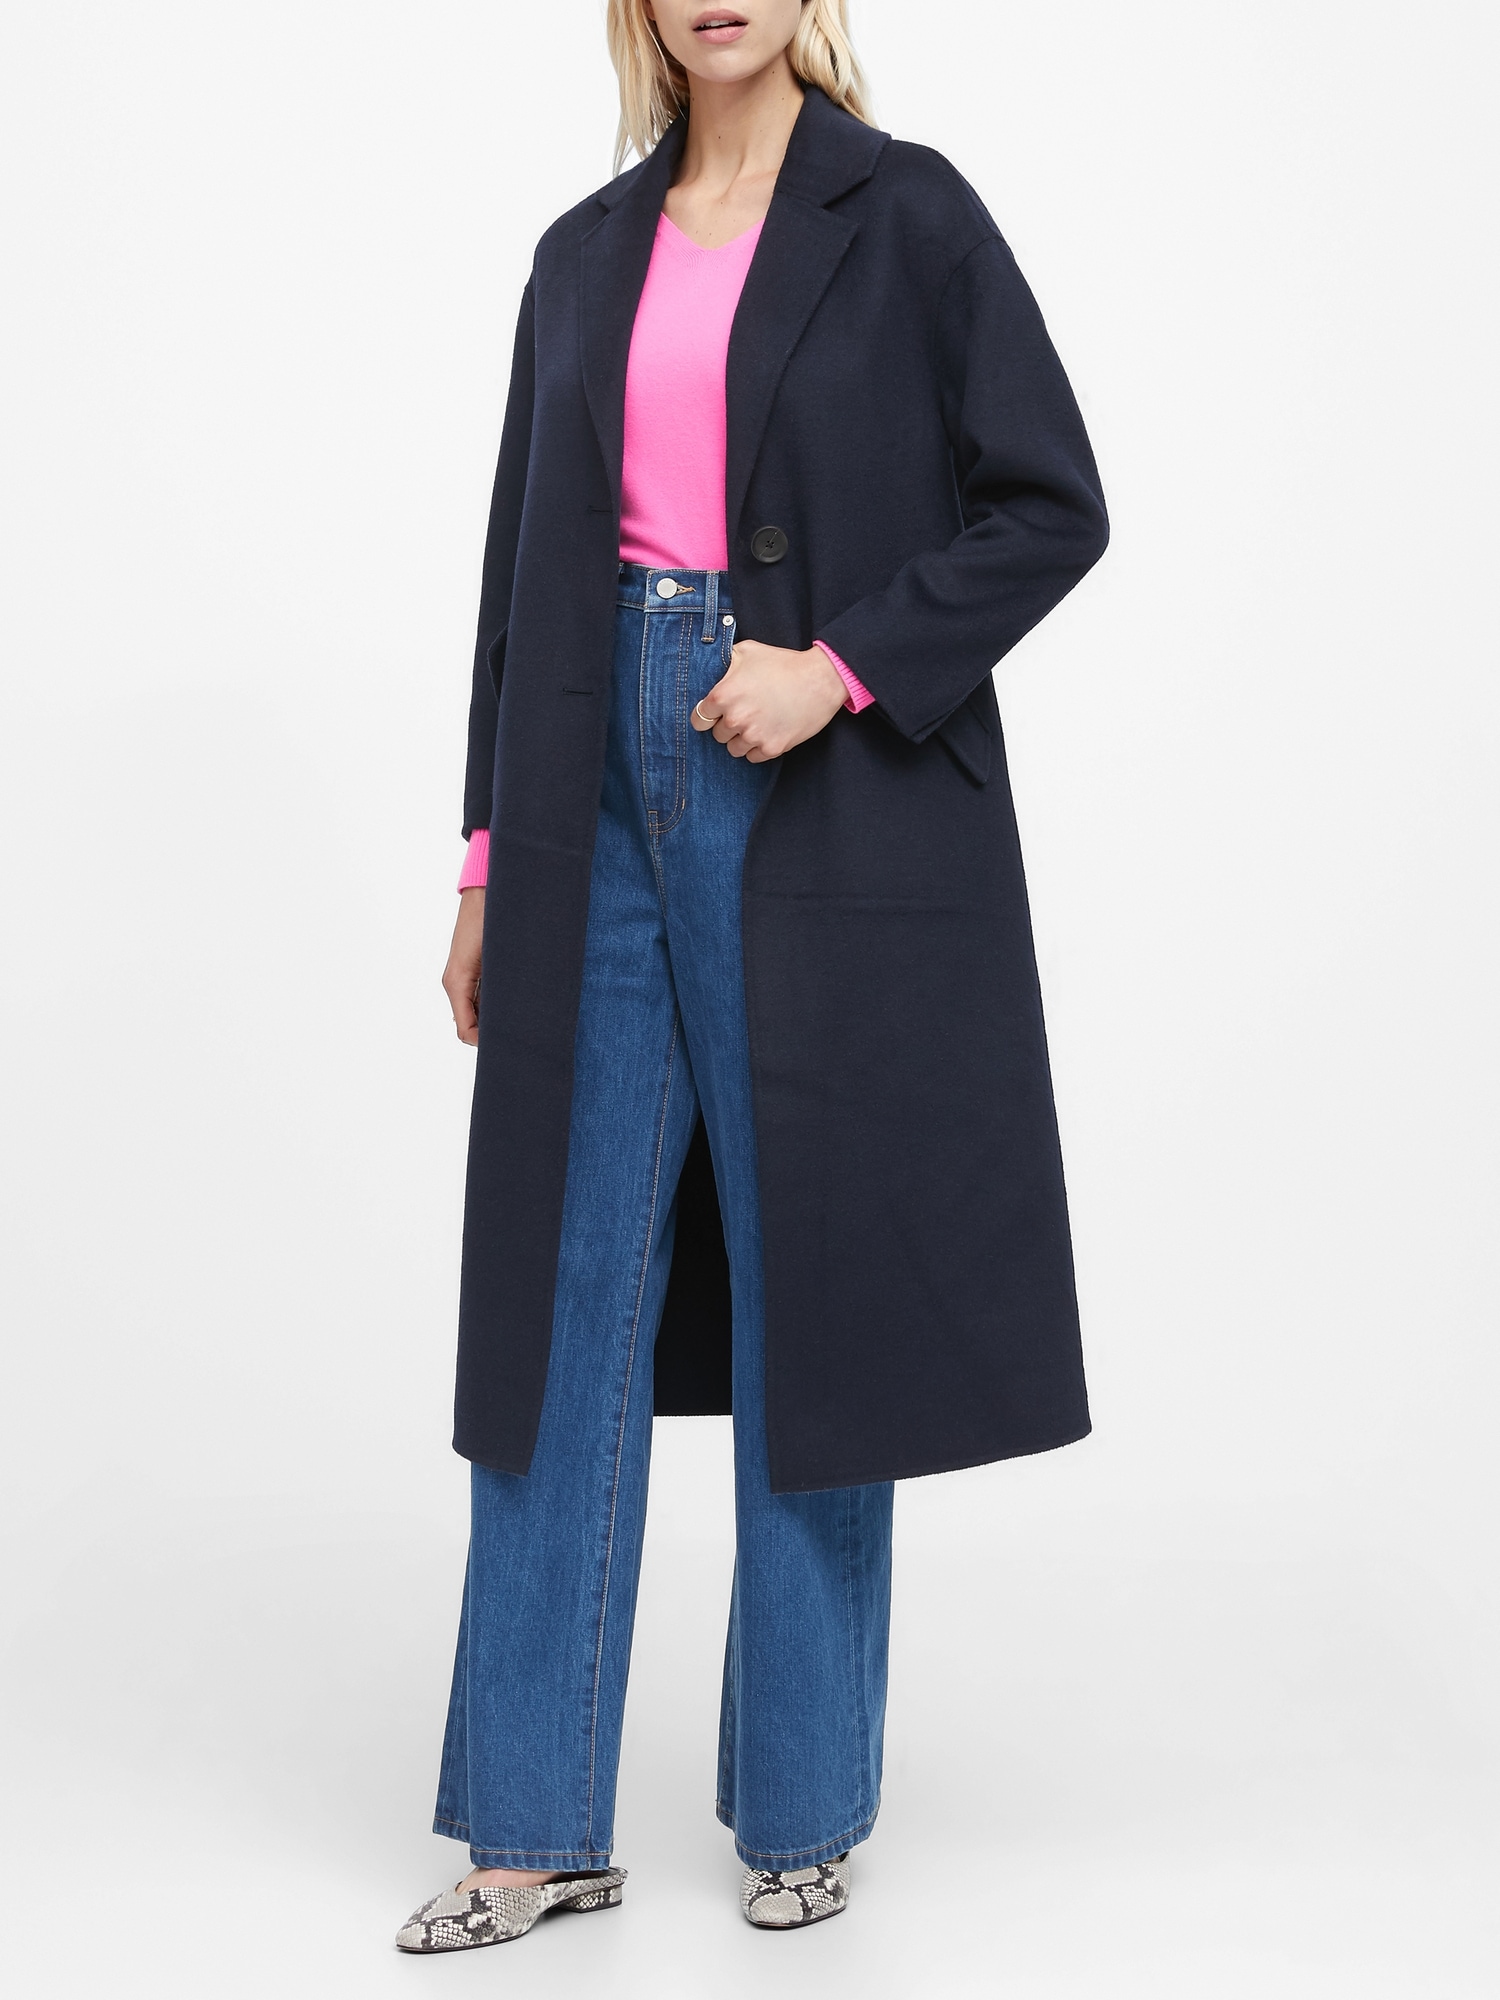 JAPAN EXCLUSIVE Double-Faced Unlined Coat | Banana Republic